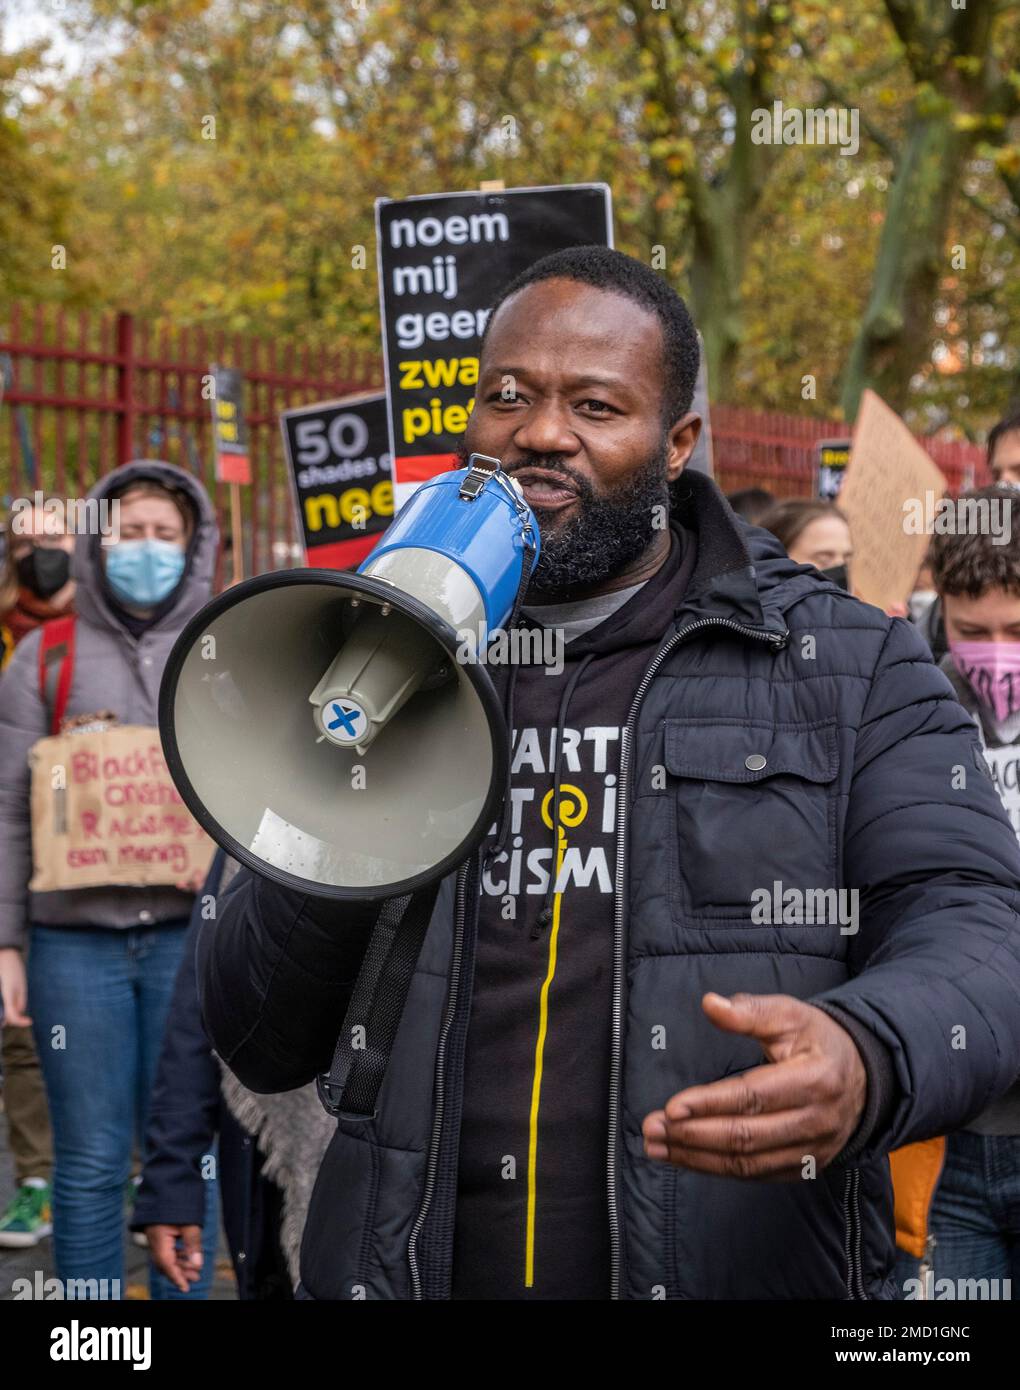 The foreman of action group Kick Out Zwarte Piet, Jerry Afriyie addresses  the bystanders during protest against Black Pete, the traditional helper of  Sinterklaas, the Dutch version of Santa Claus, in Breda,